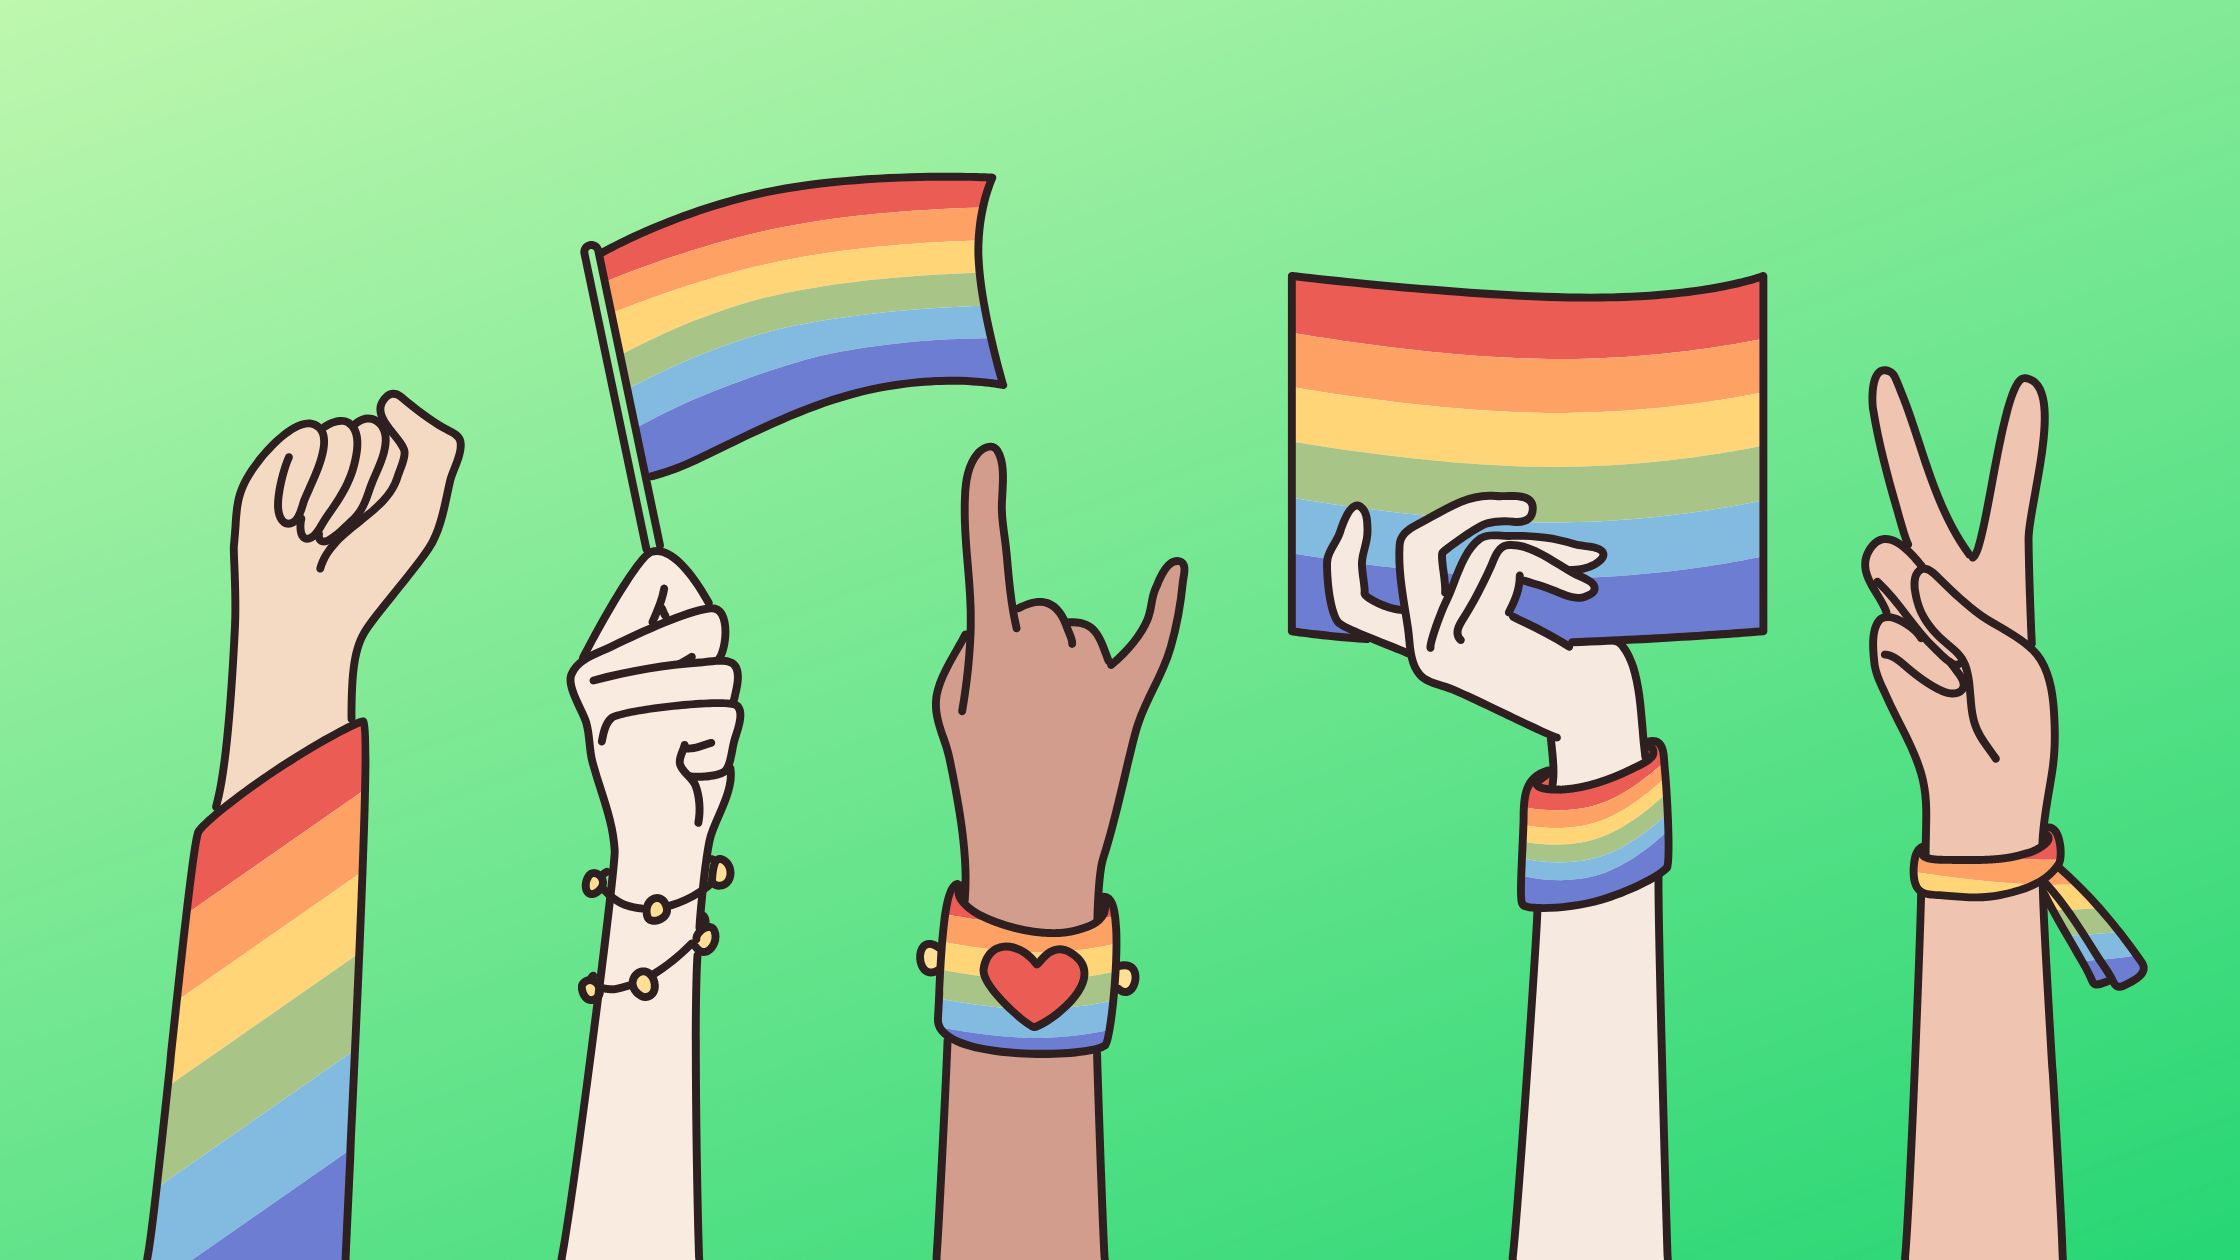 5 hands in the air holding rainbow flags